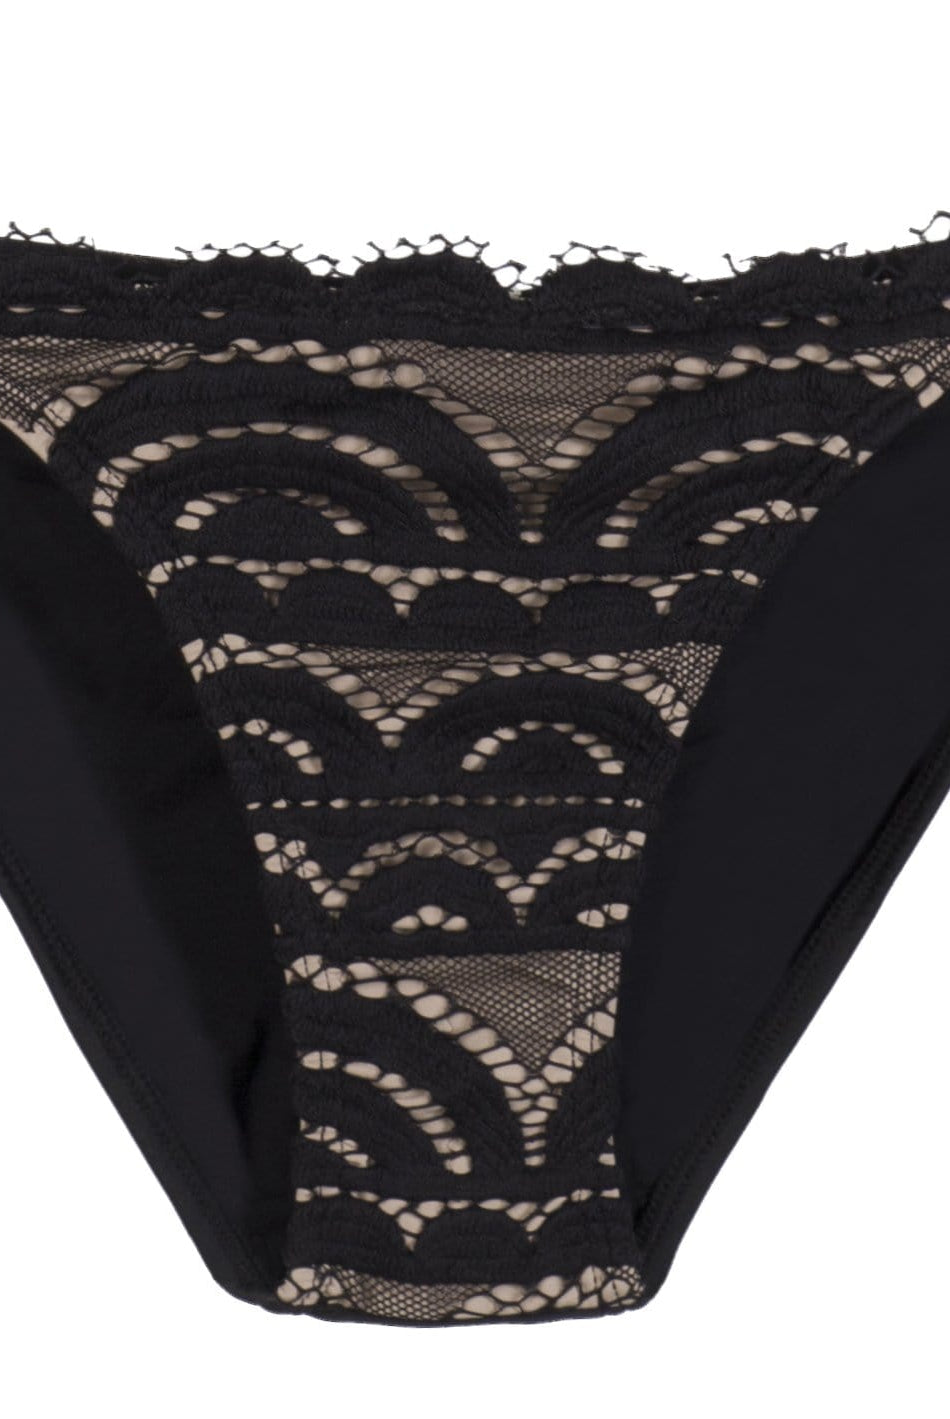 Midnight Lace Fanned Bottoms - PilyQ